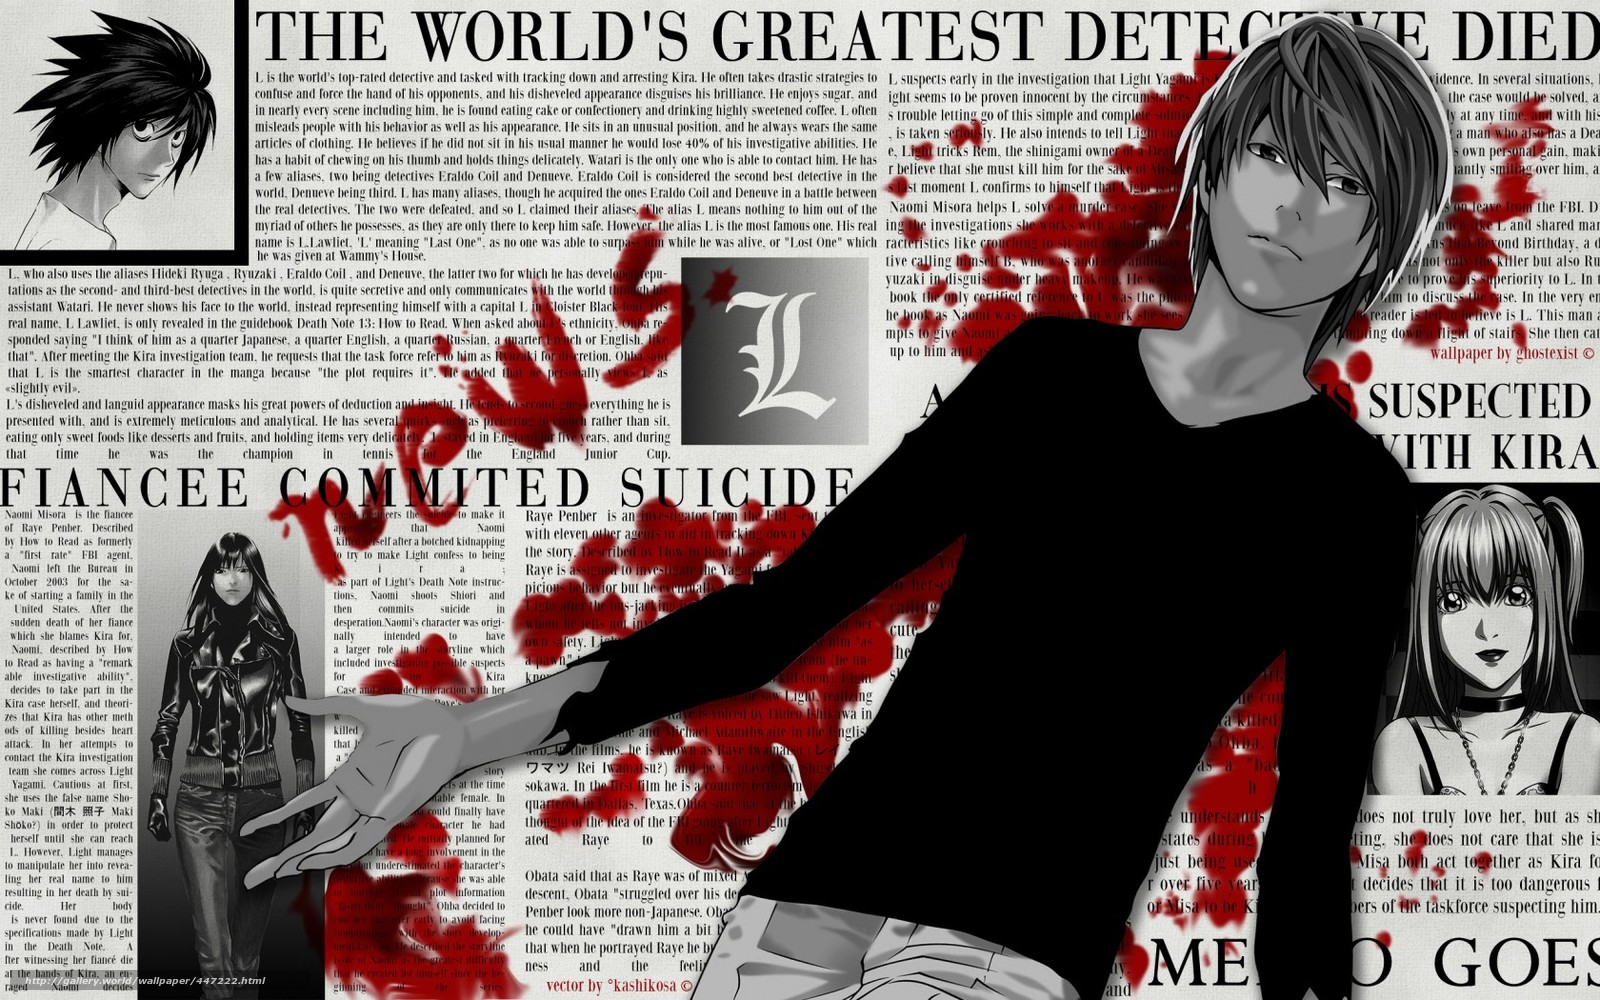 Download Wallpaper Anime, Death Note, Yagami Light, - Death Note Newspaper  - 1600x1000 Wallpaper 